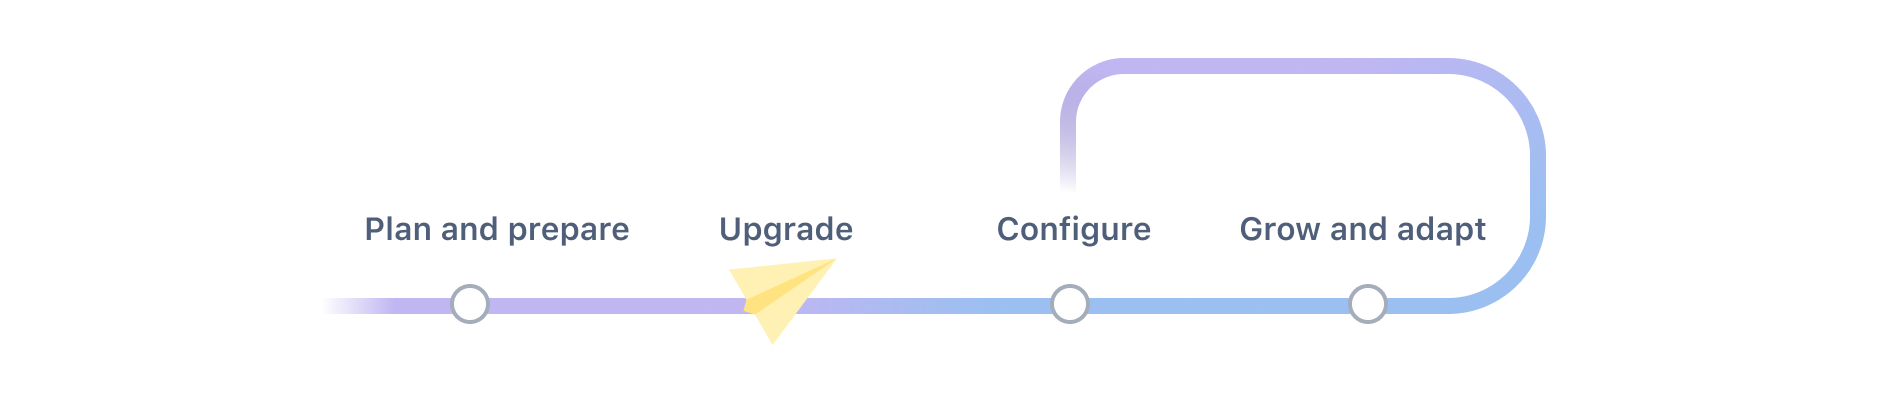 Diagram with plan, upgrade, configure and grow phases. The upgrade phase is highlighted.